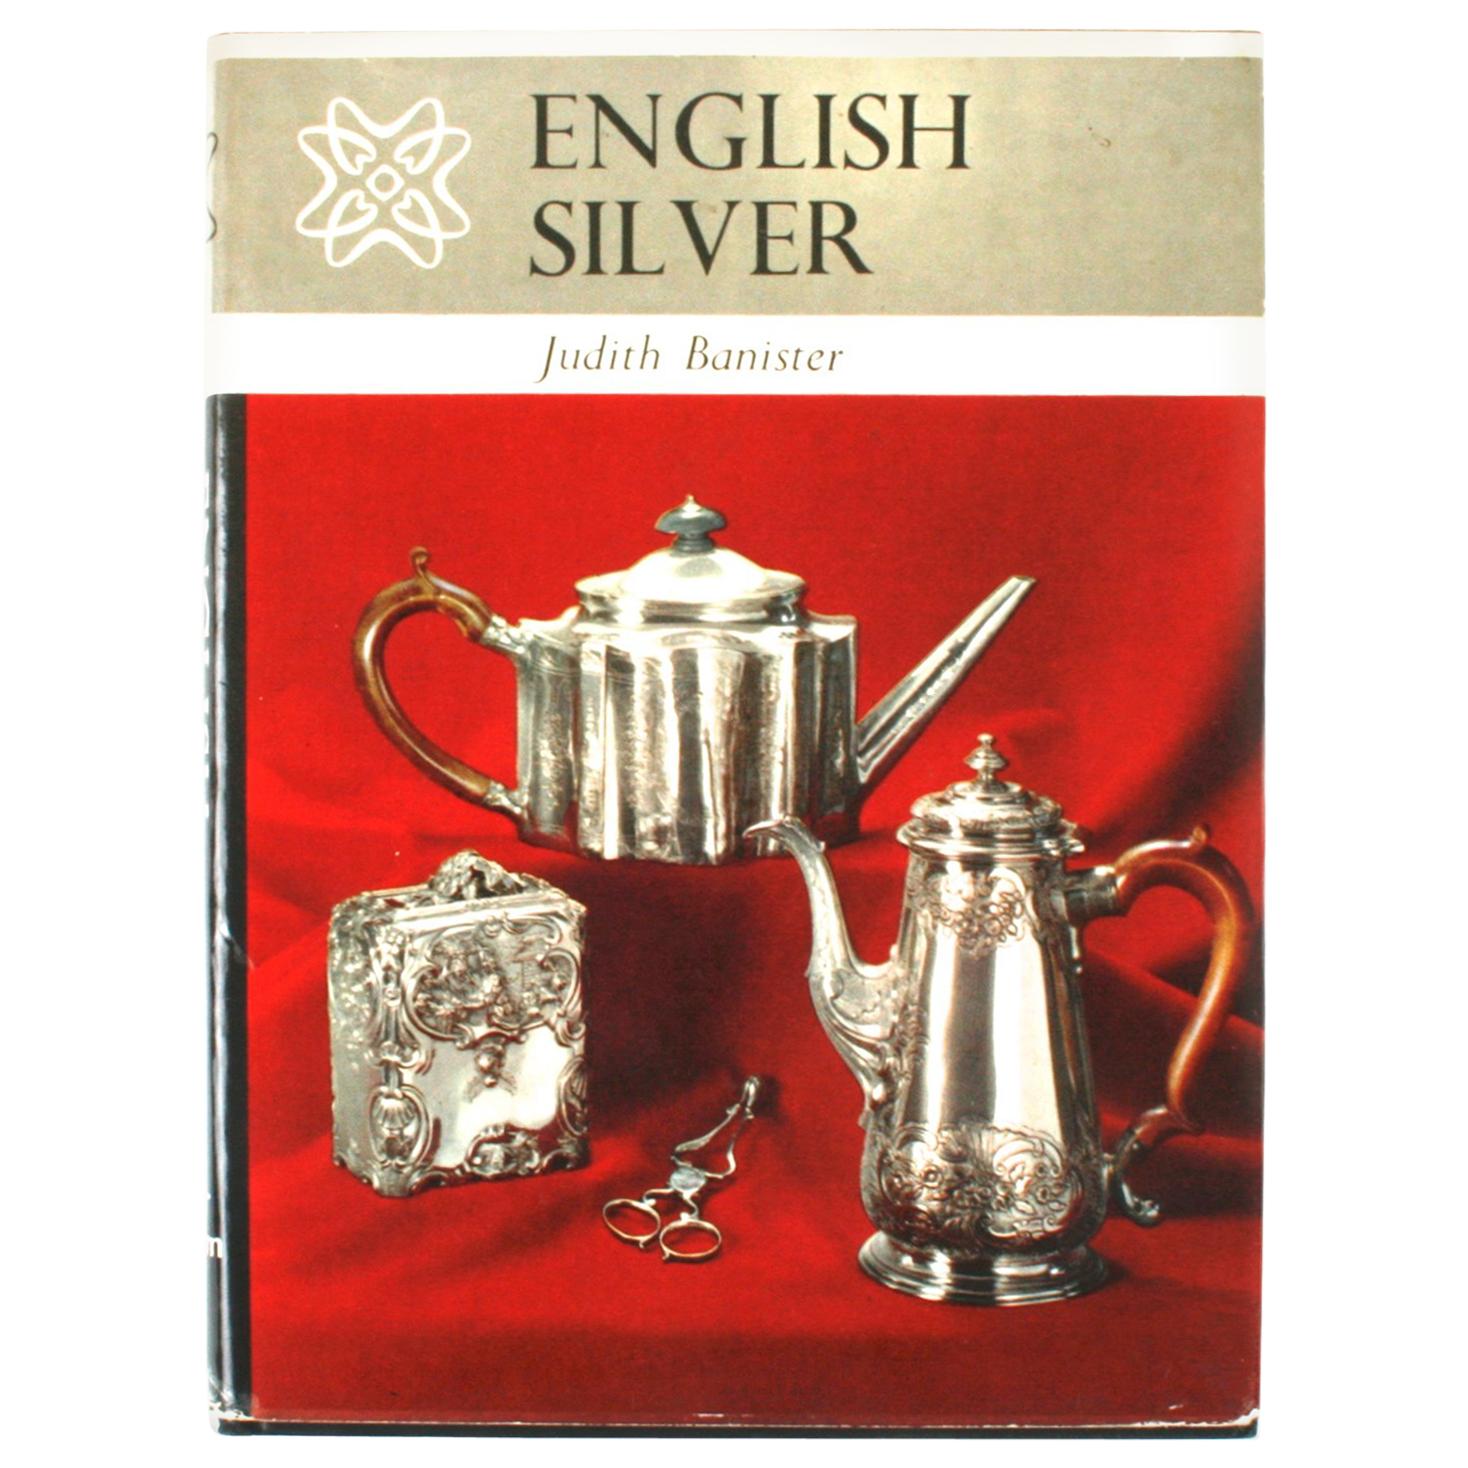 English Silver by Judith Banister